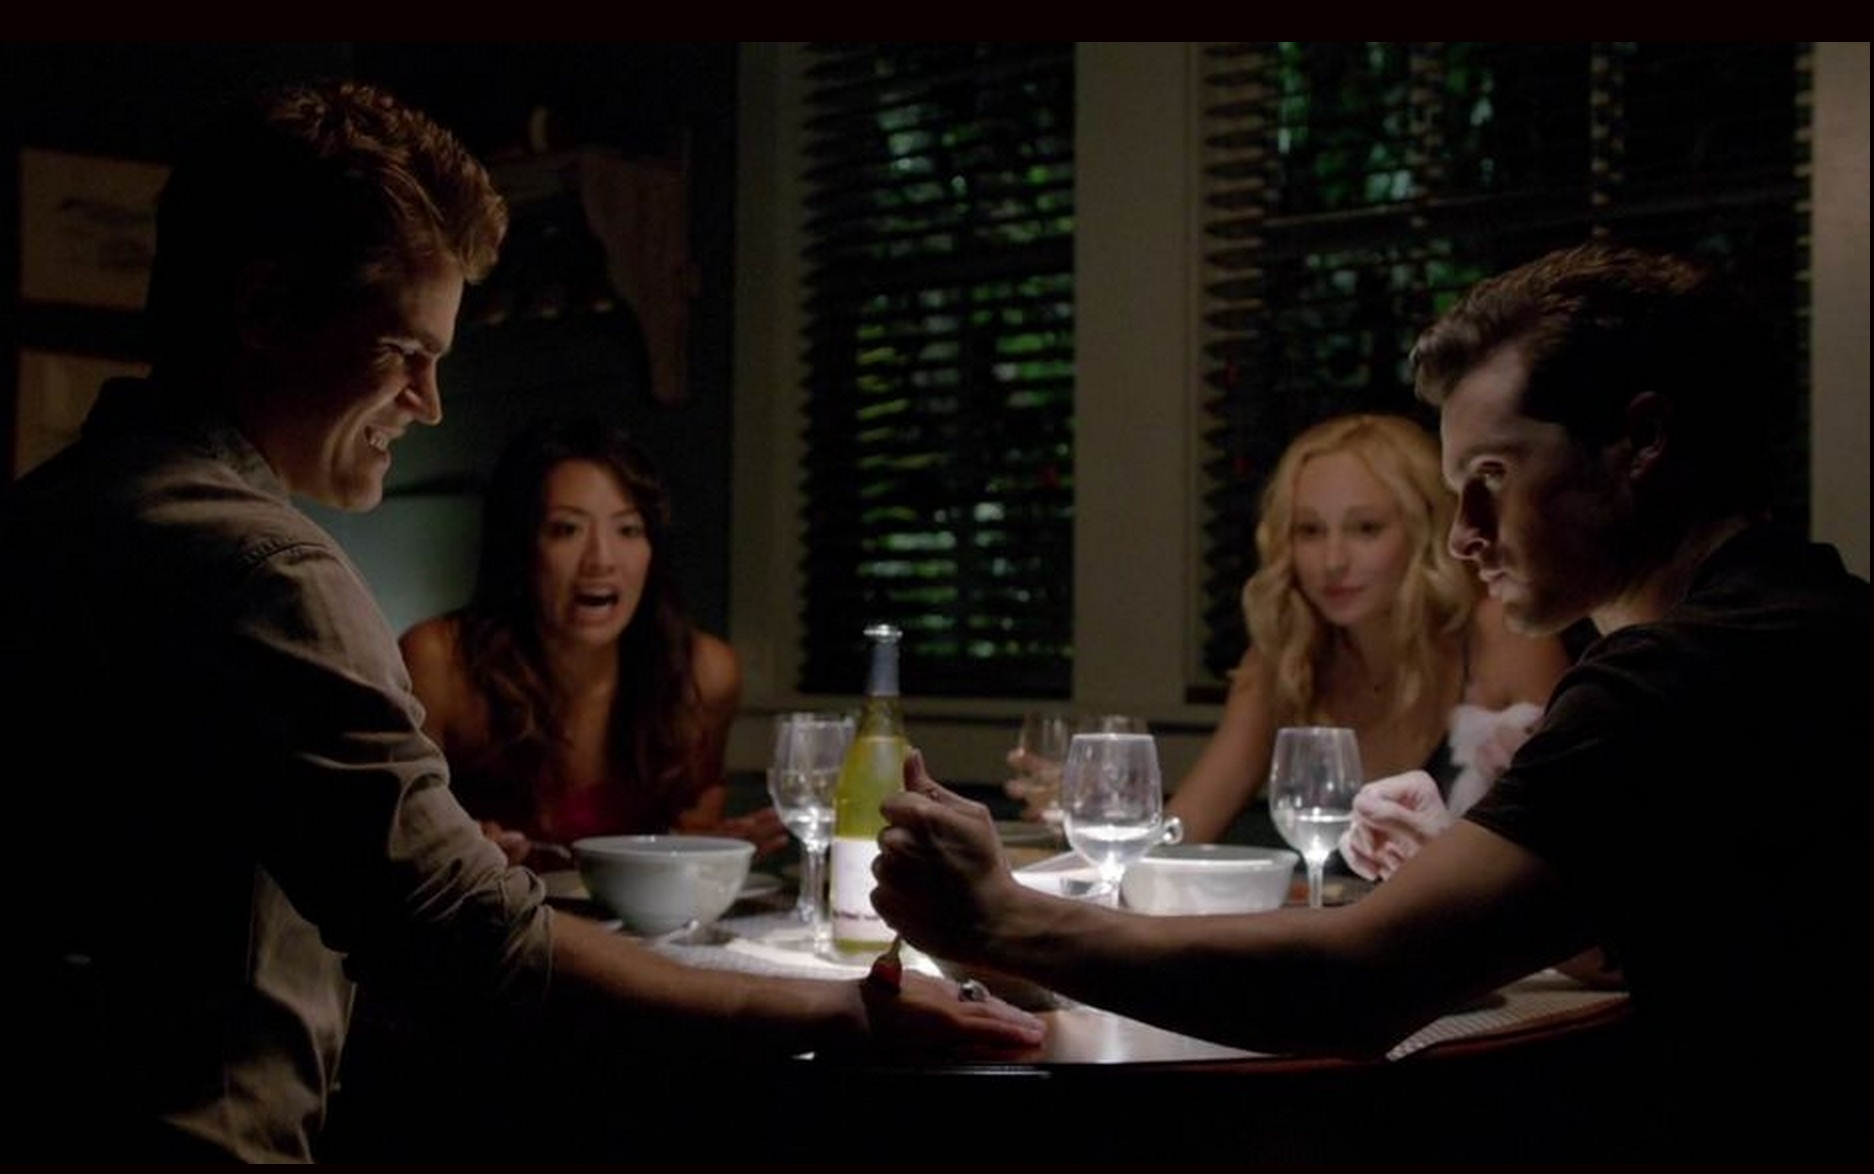 Paul Wesley, Emily C. Chang, Candice Accola, and Michael Malarkey in The Vampire Diaries